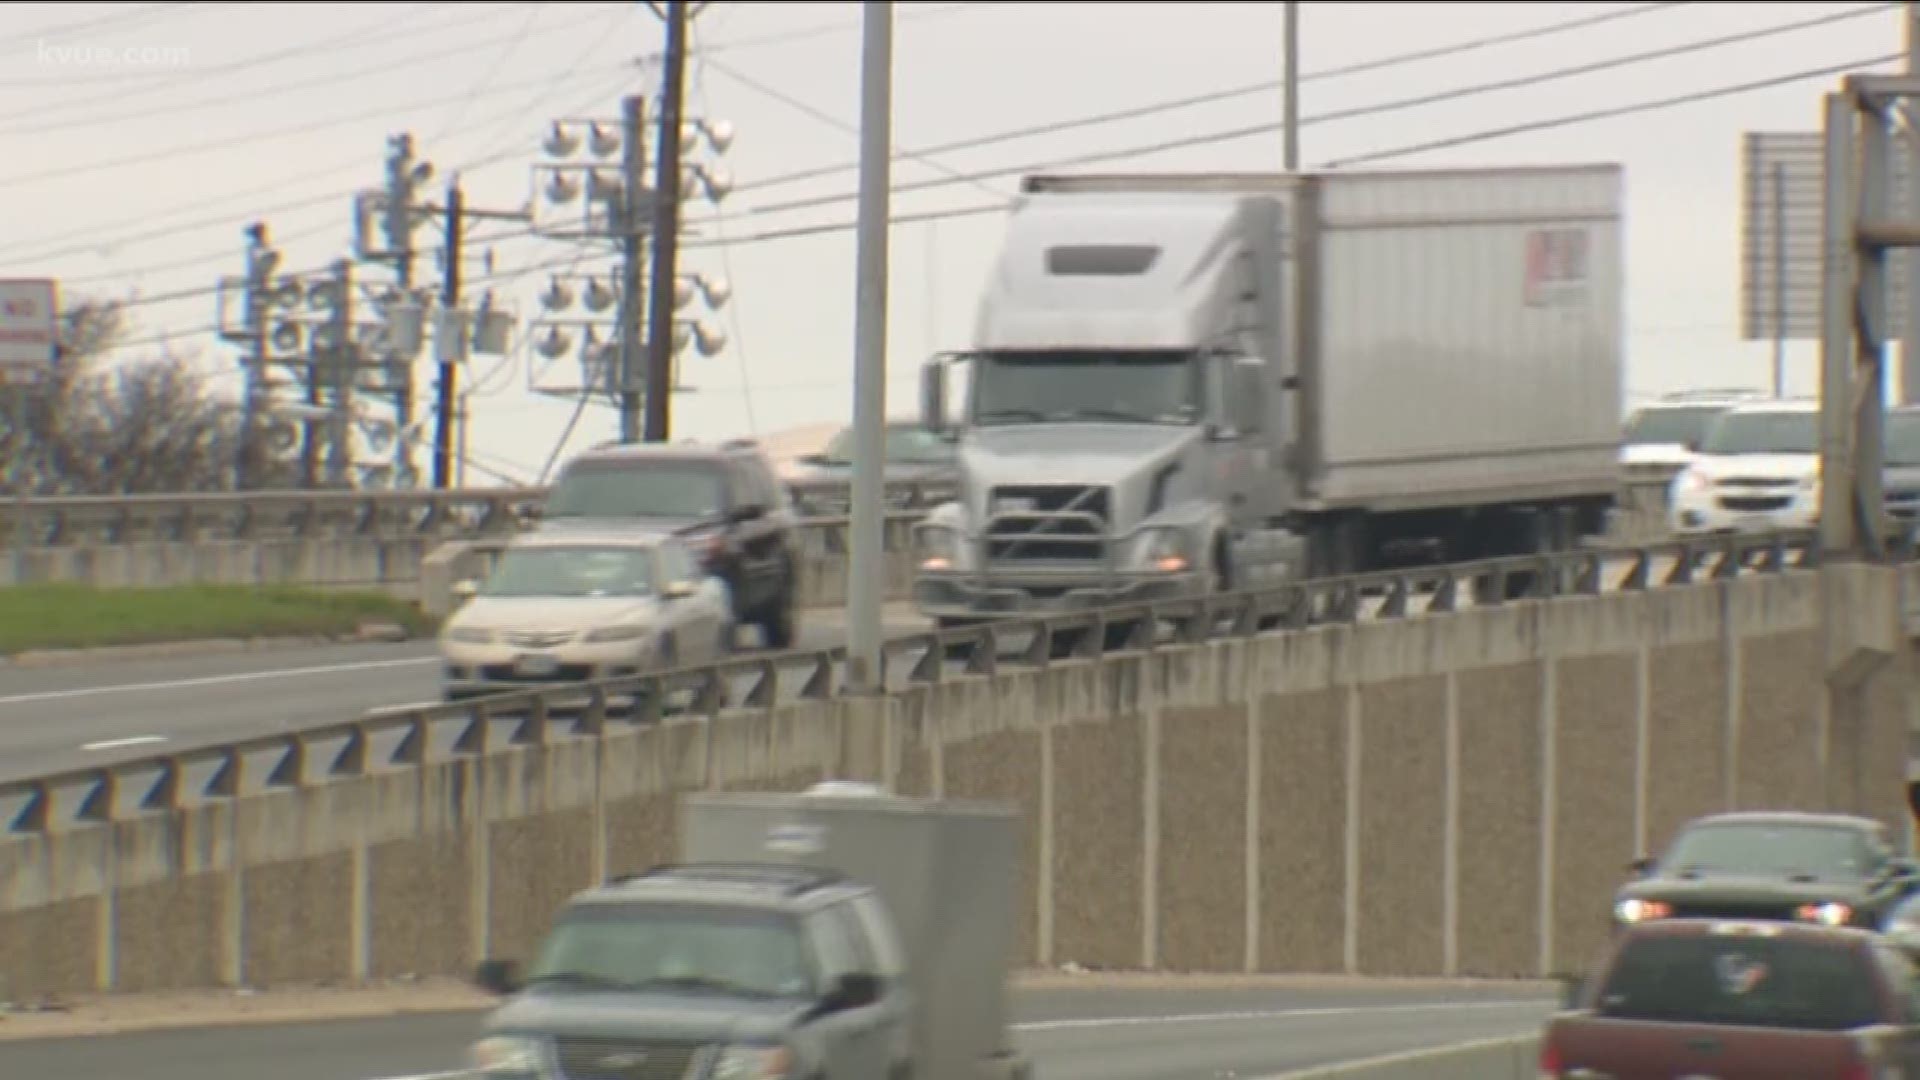 The Austin City Council and CapMetro met Monday to work on a plan to help reduce traffic.